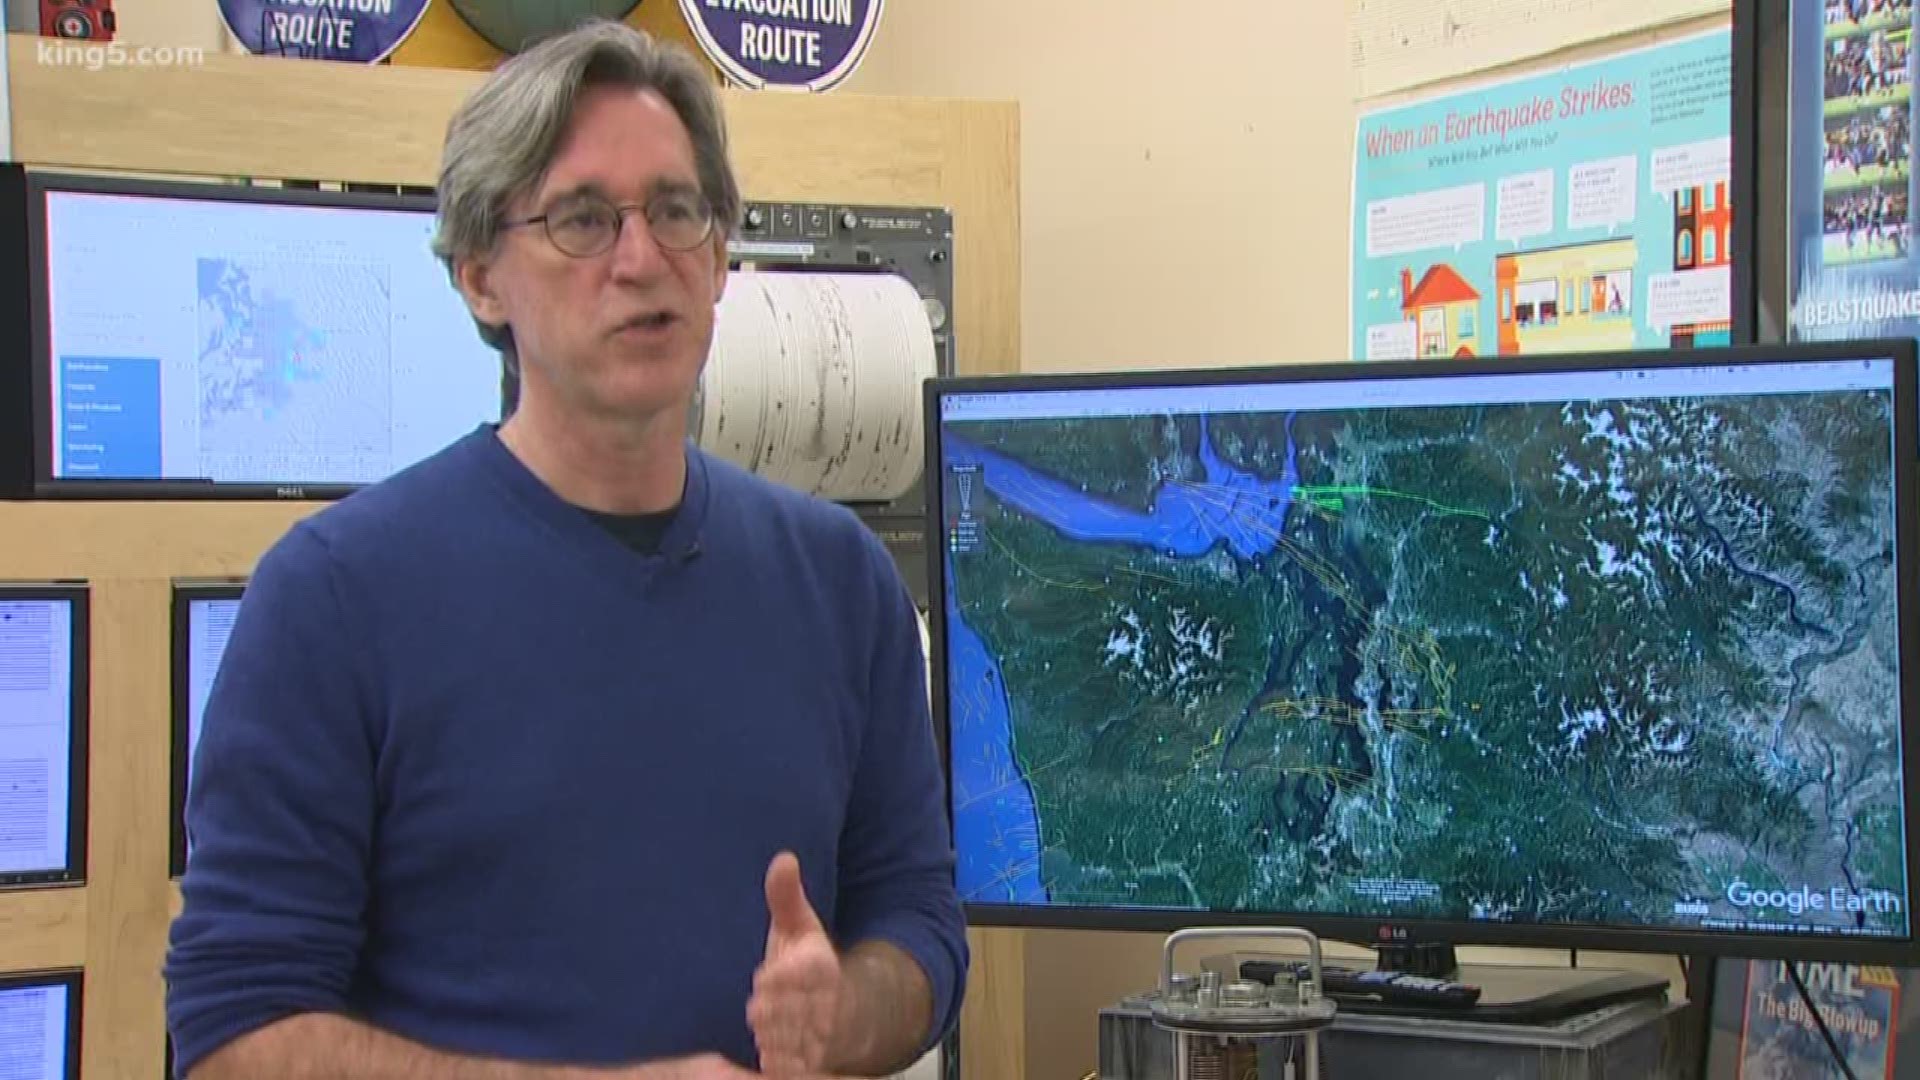 It has been a rocky 24 hours for people in east king county, where a swarm of small earthquakes rattled homes and businesses.